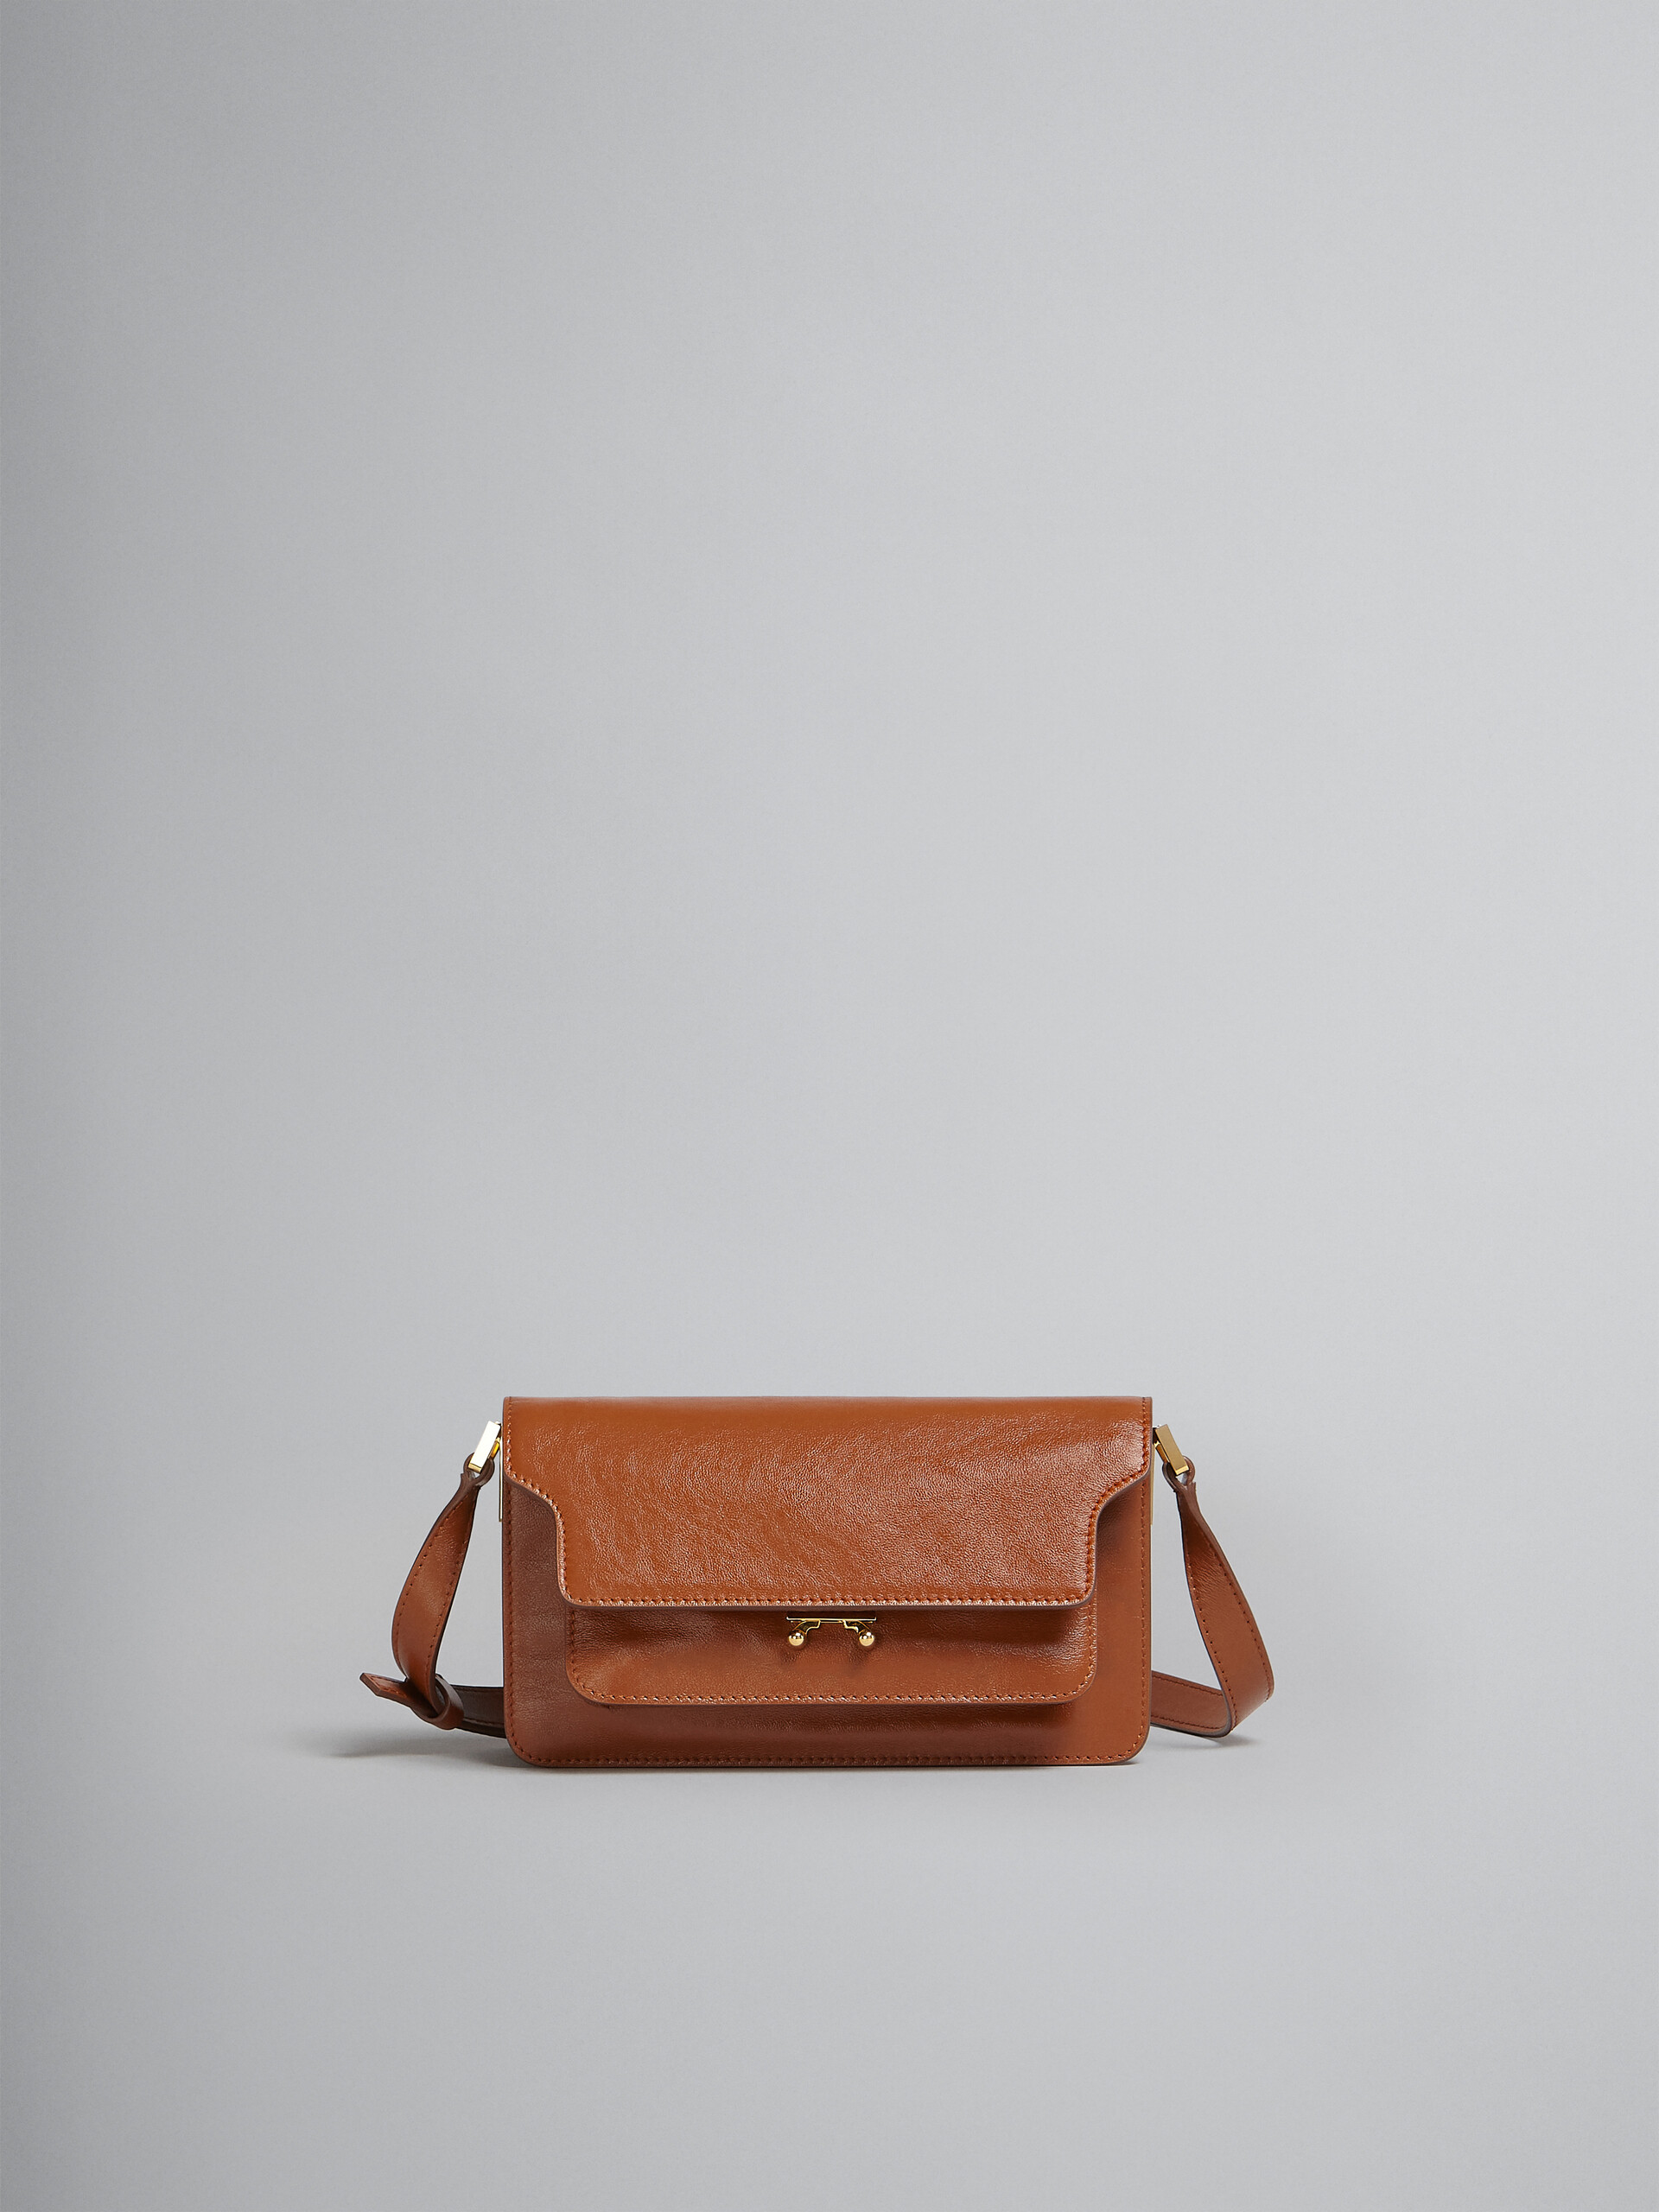 Trunk Soft Bag E/W in brown leather - Shoulder Bags - Image 1